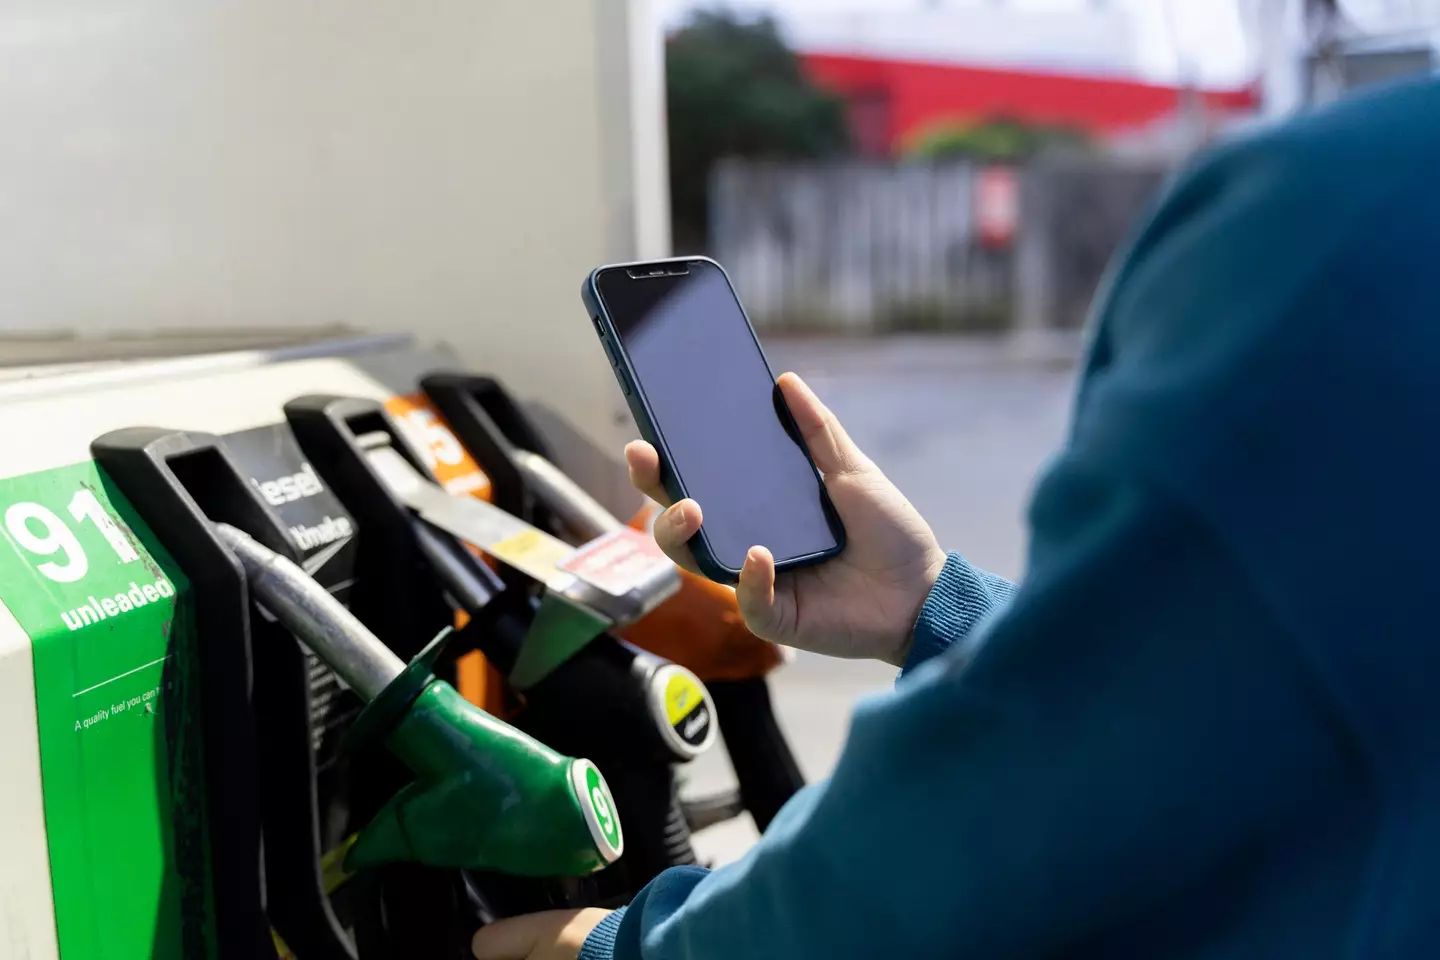 It's strongly recommended you don't use a mobile phone at the petrol or diesel pump. (Getty Stock Image)